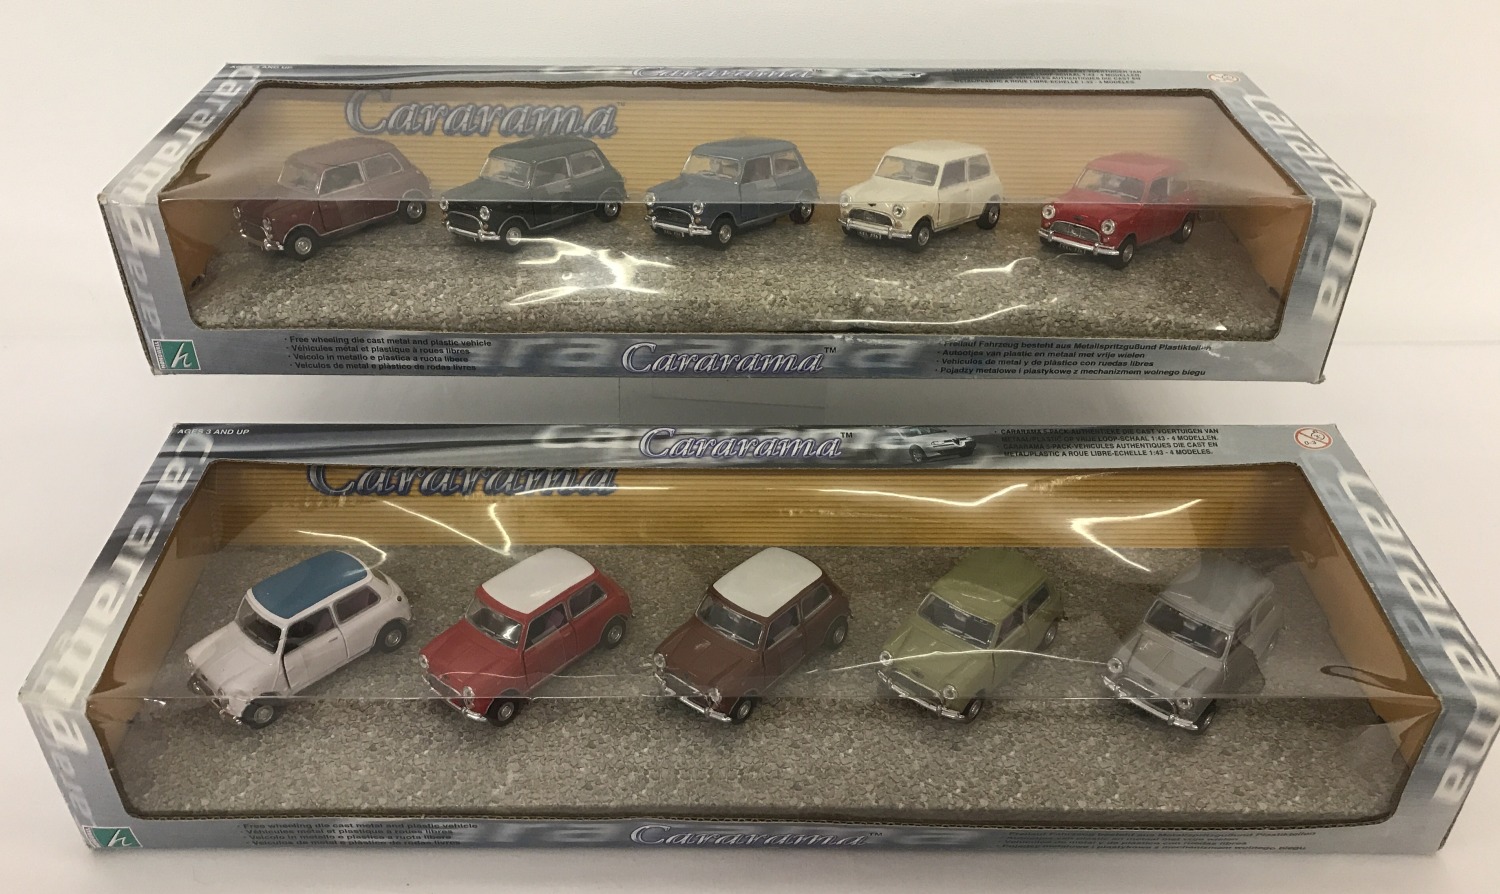 2 boxed sets of vintage Mini Cooper cars by Cararama. 1:43 scale.